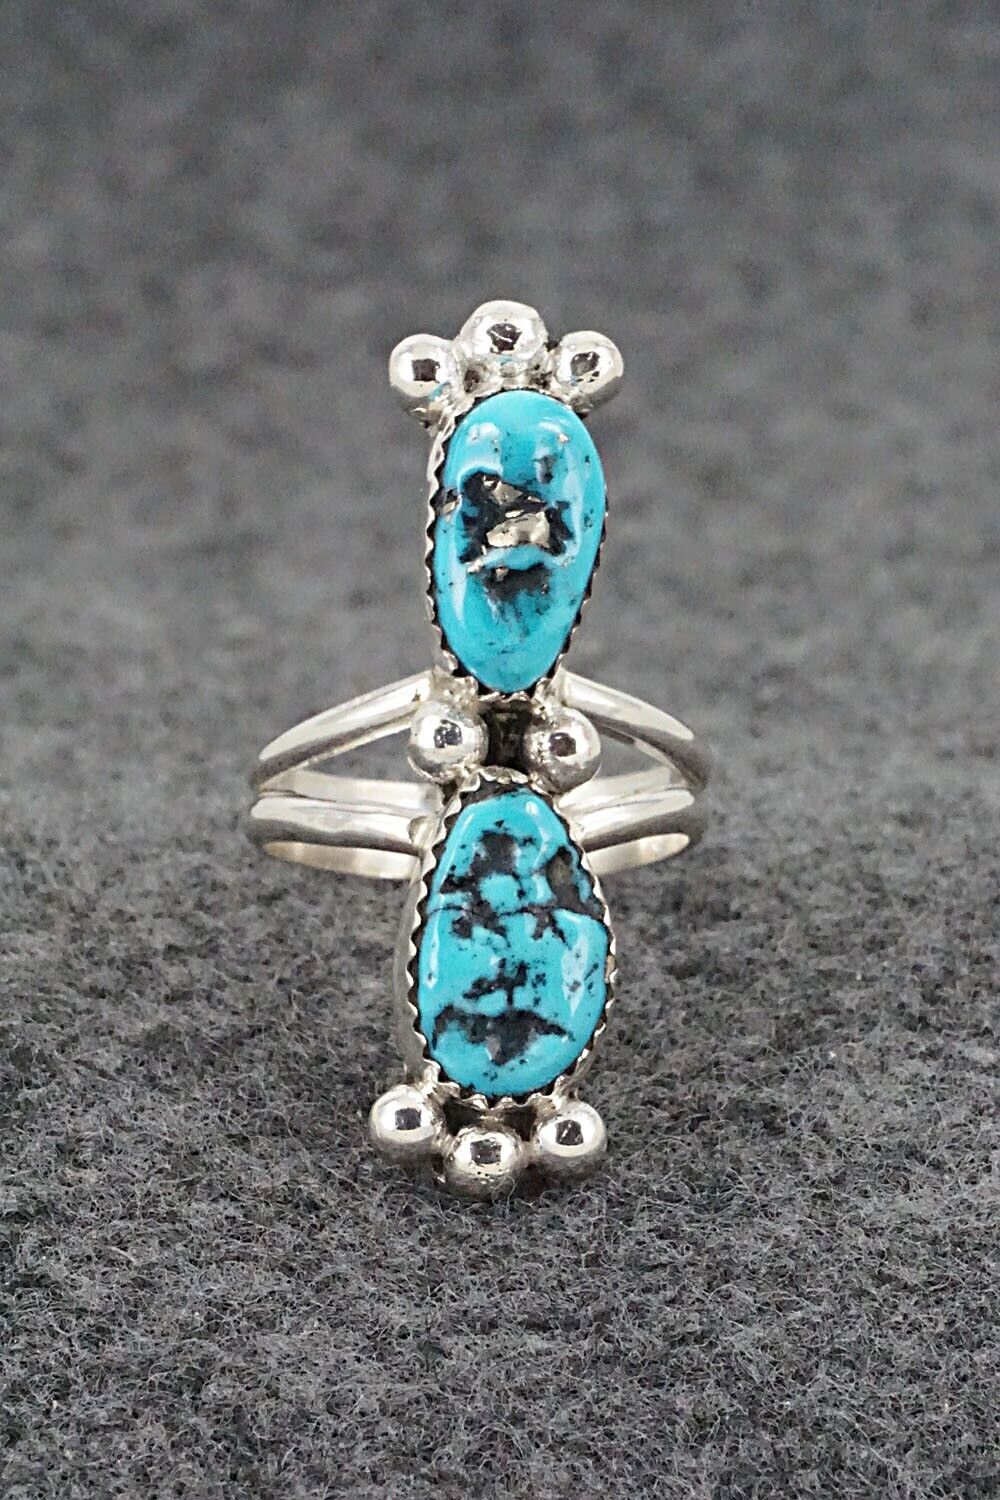 Turquoise & Sterling Silver Ring - Jeff Lucio - Size 7